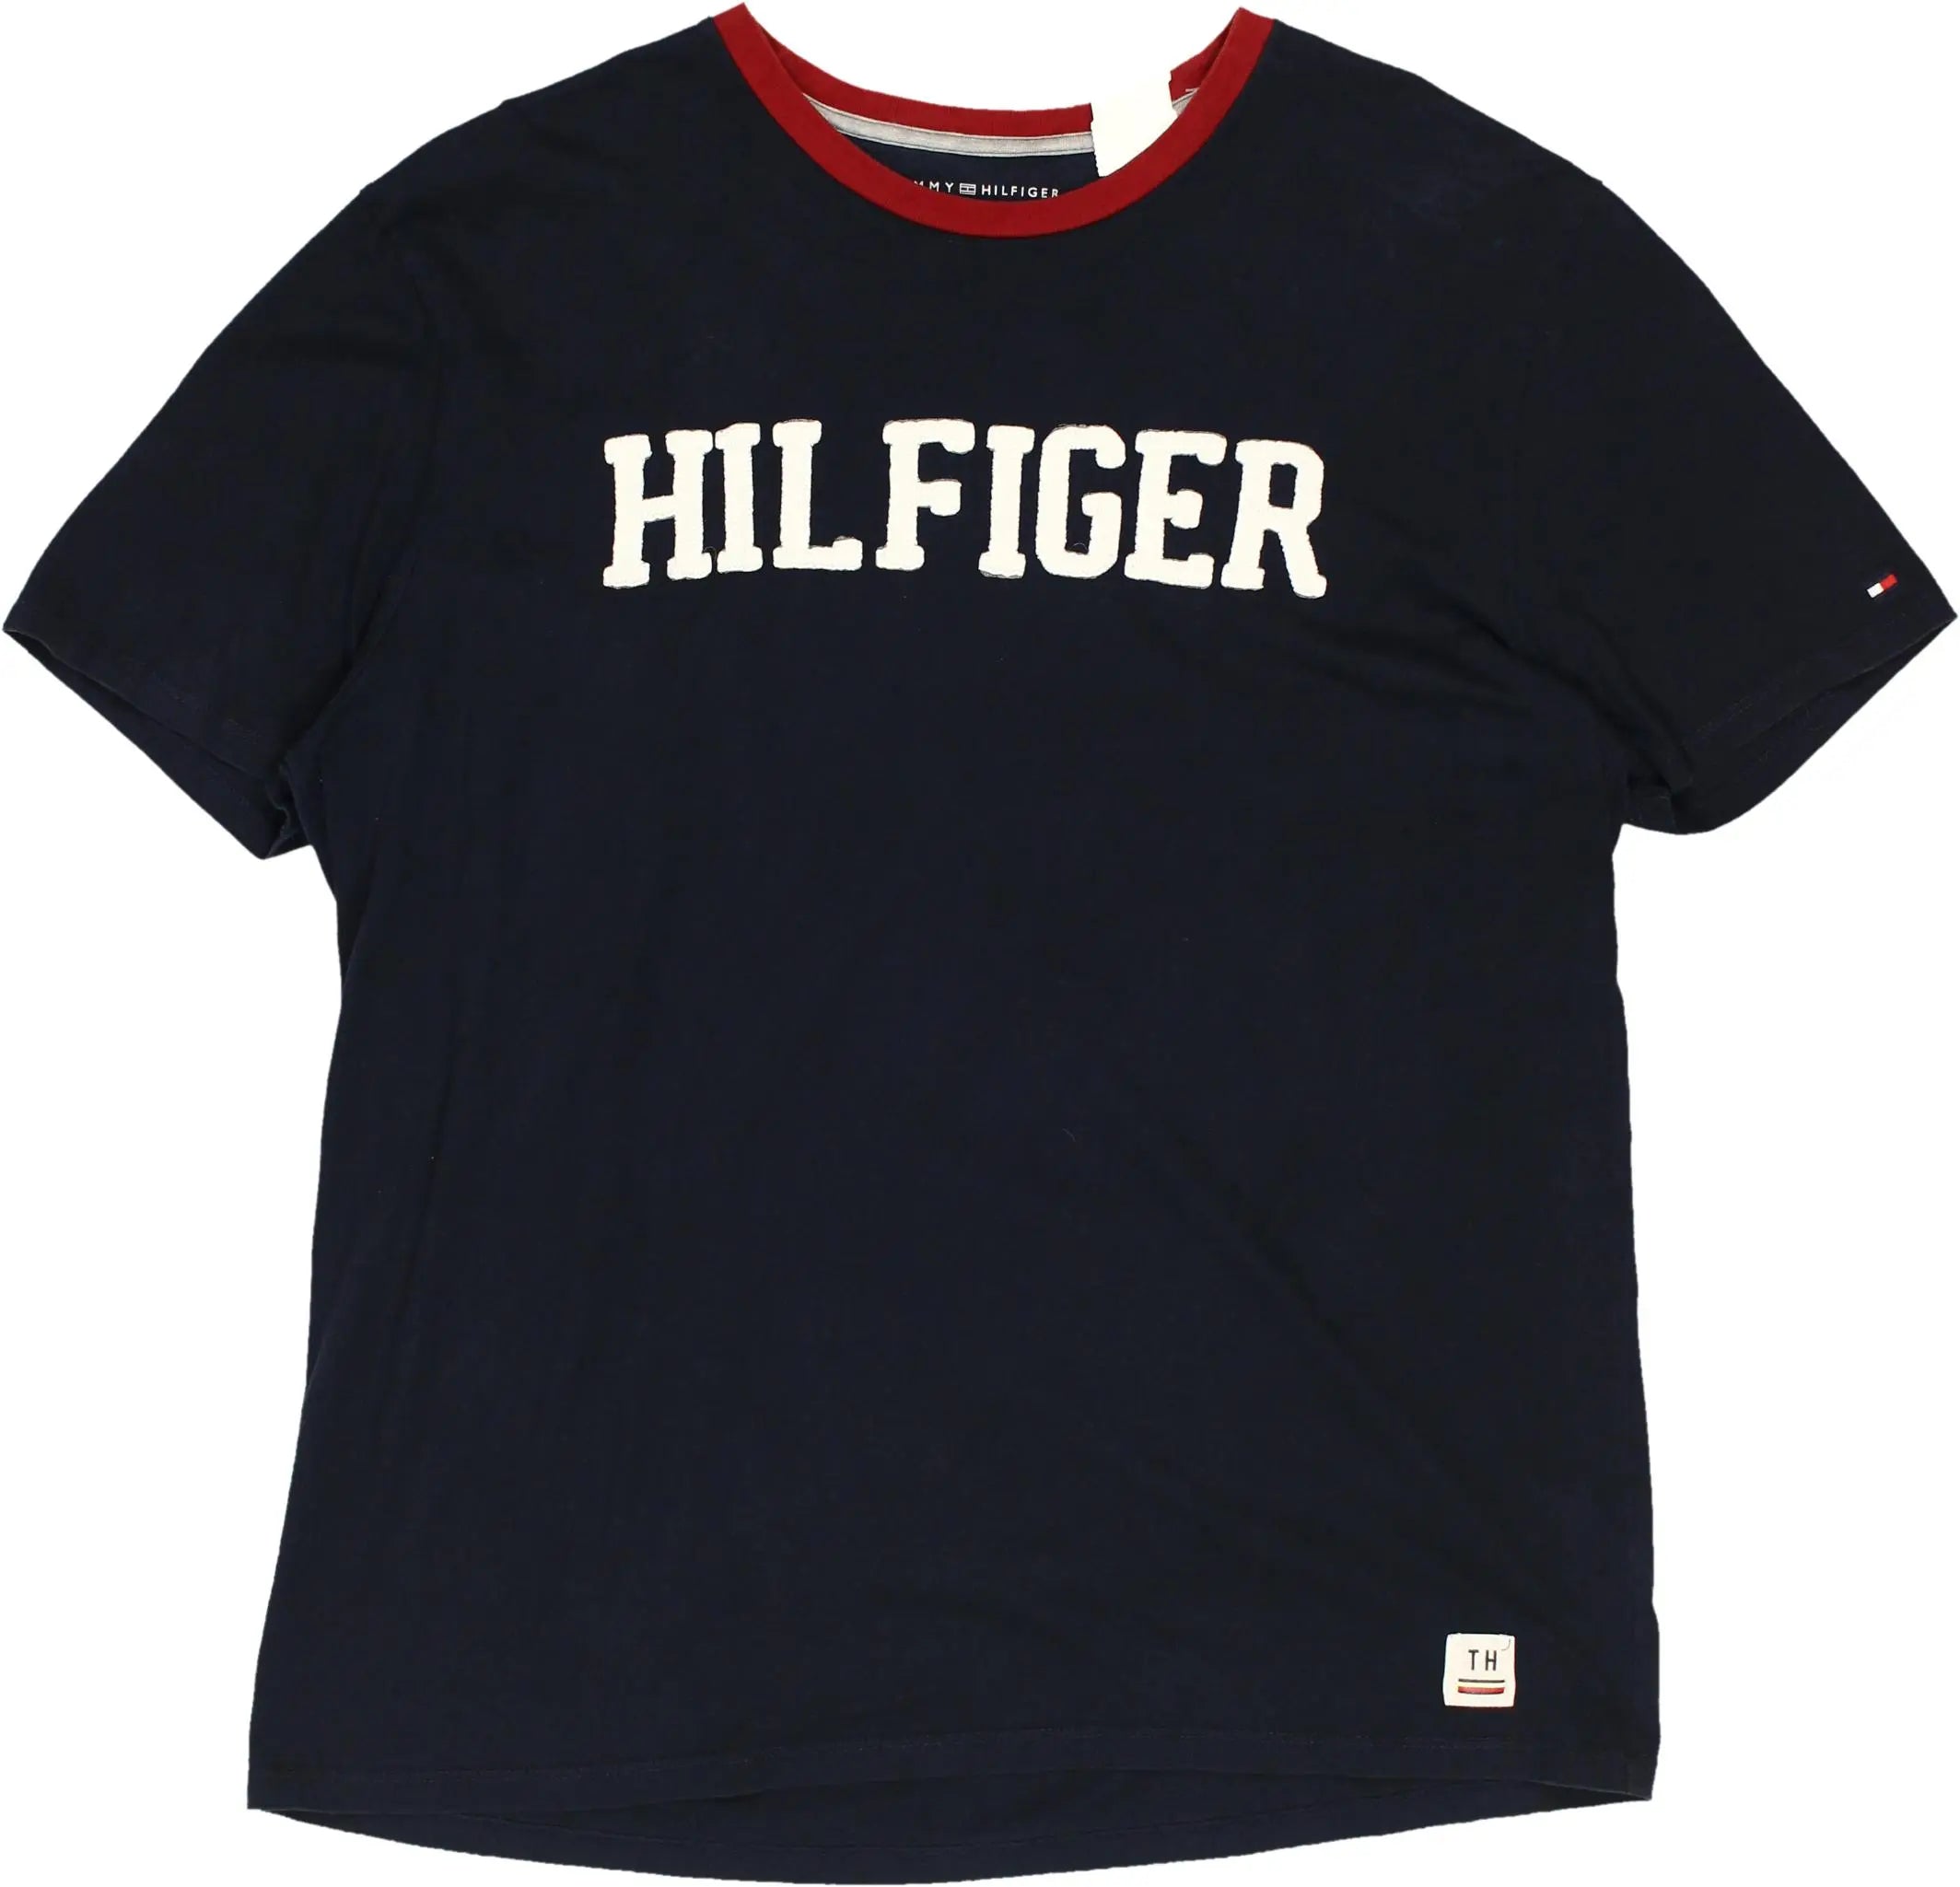 Tommy Hilfiger - T-shirt- ThriftTale.com - Vintage and second handclothing